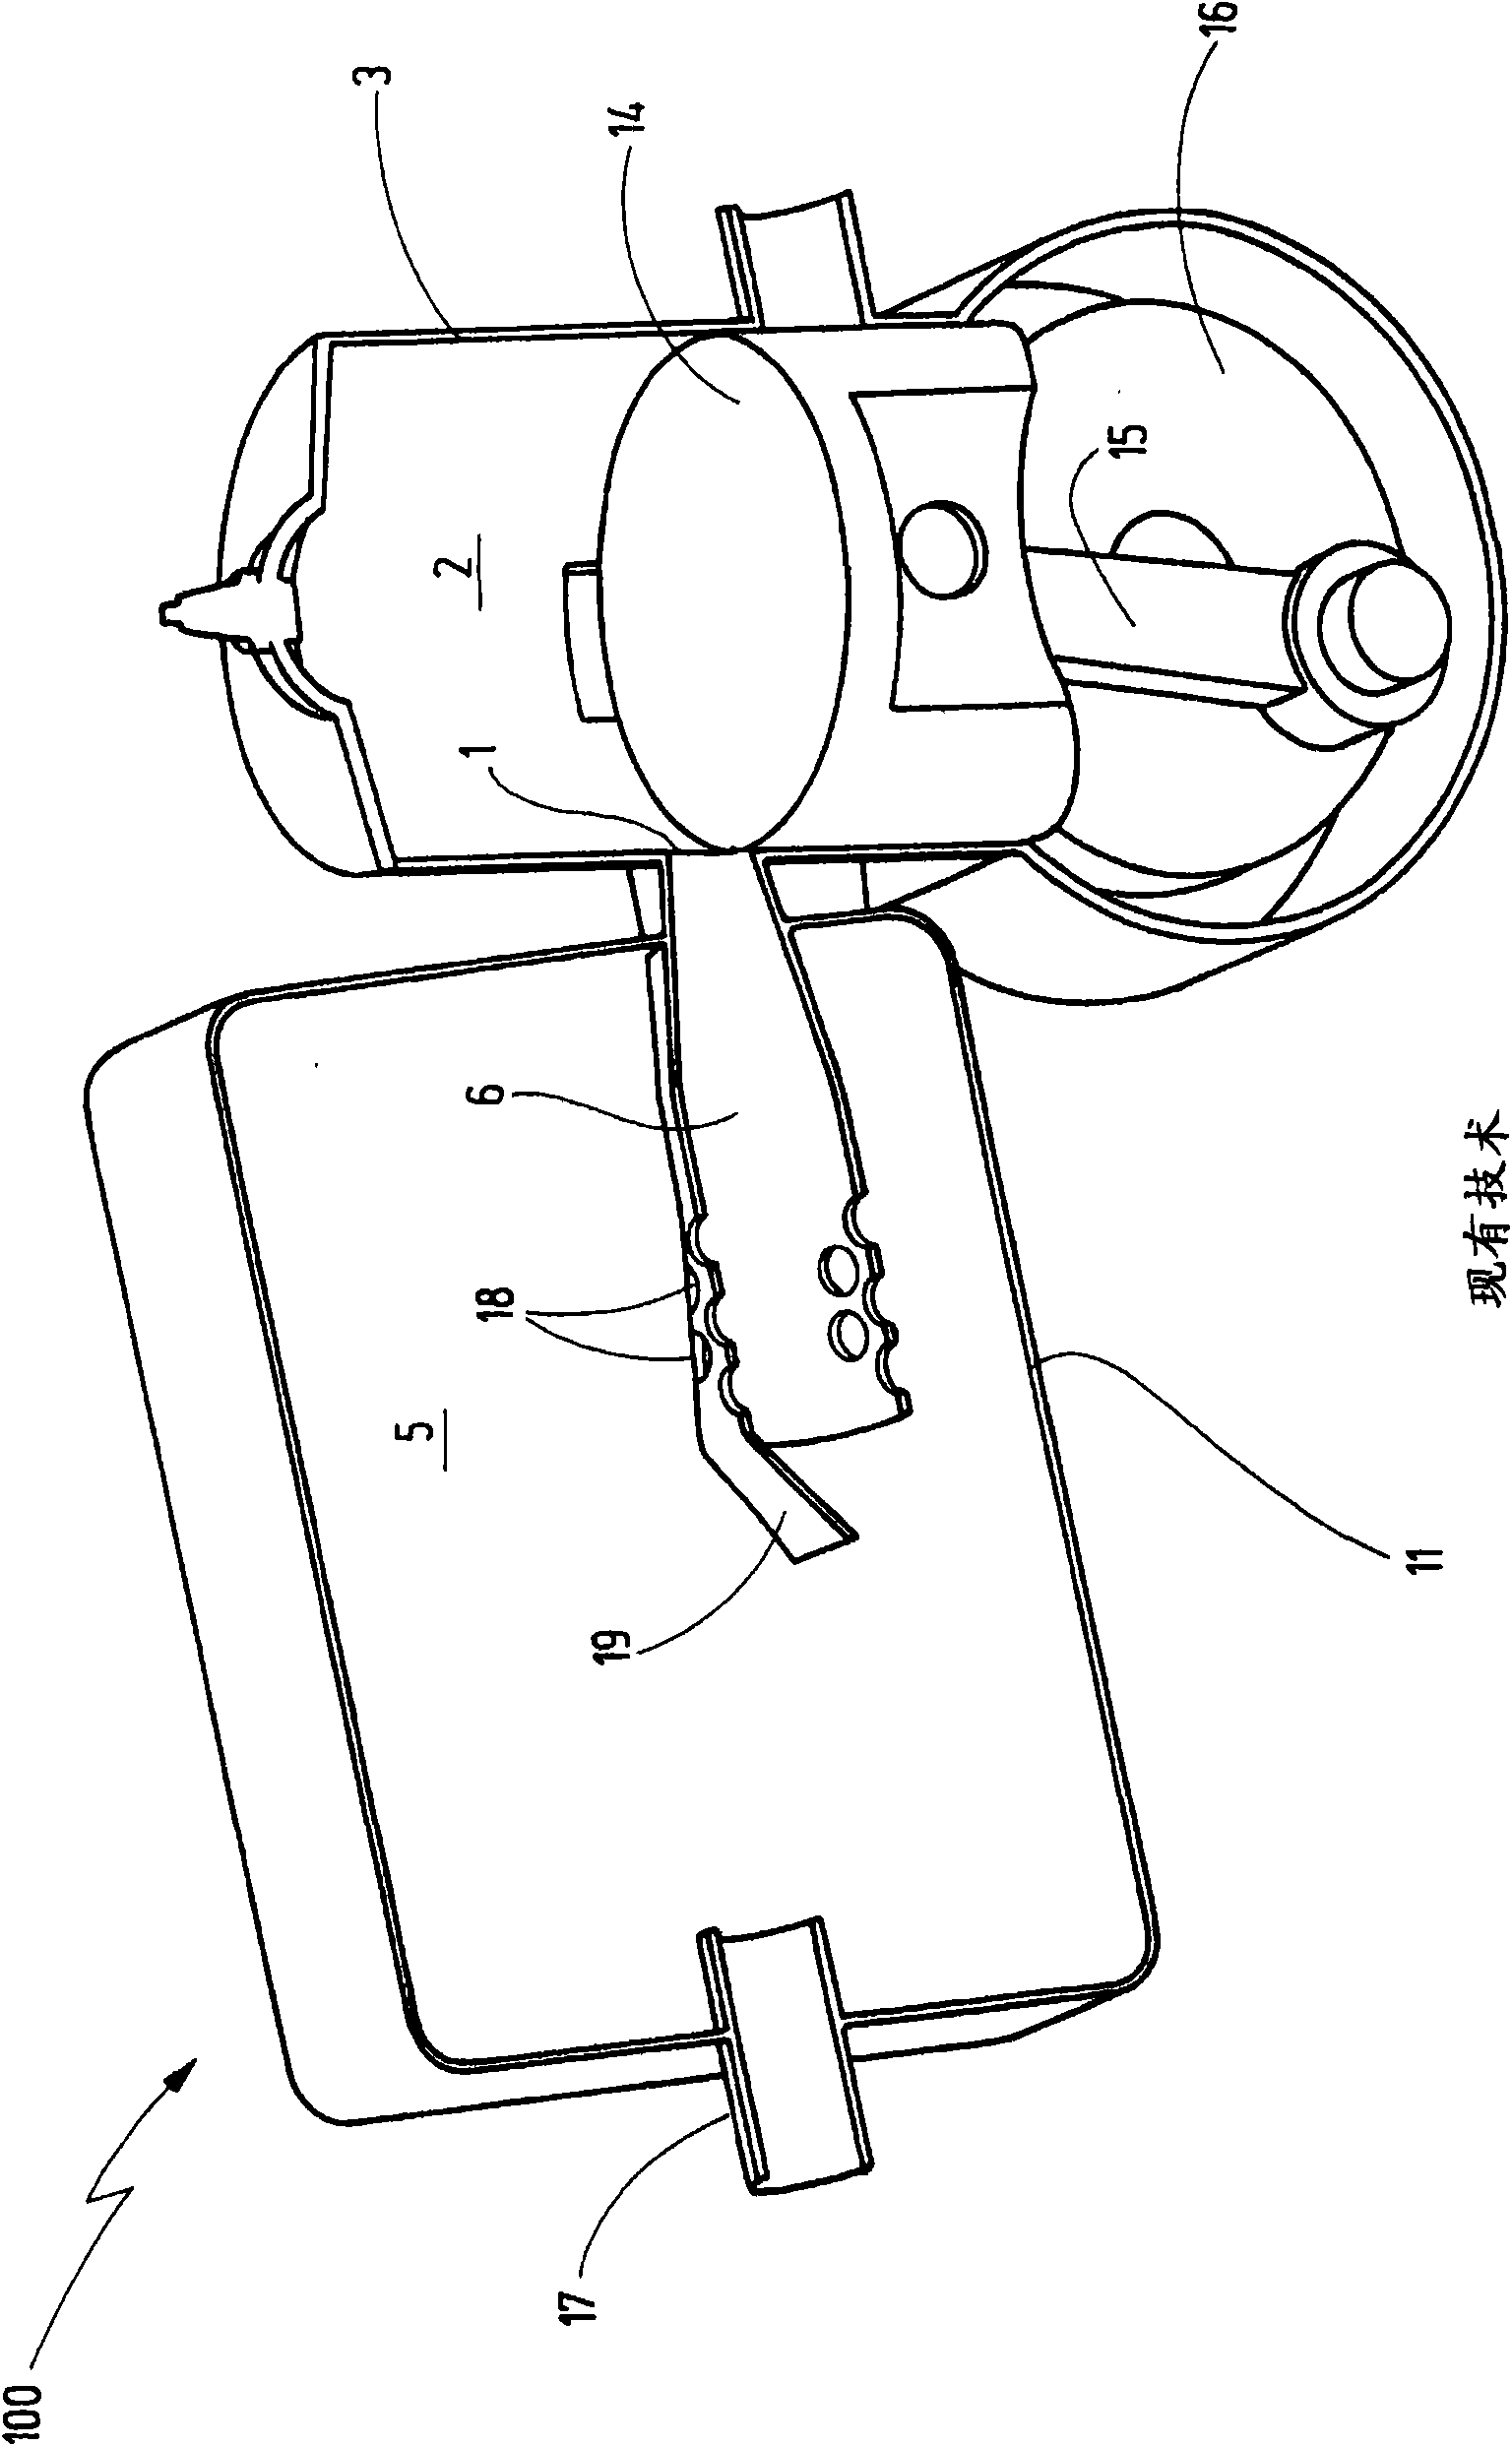 Silencer for a motor device